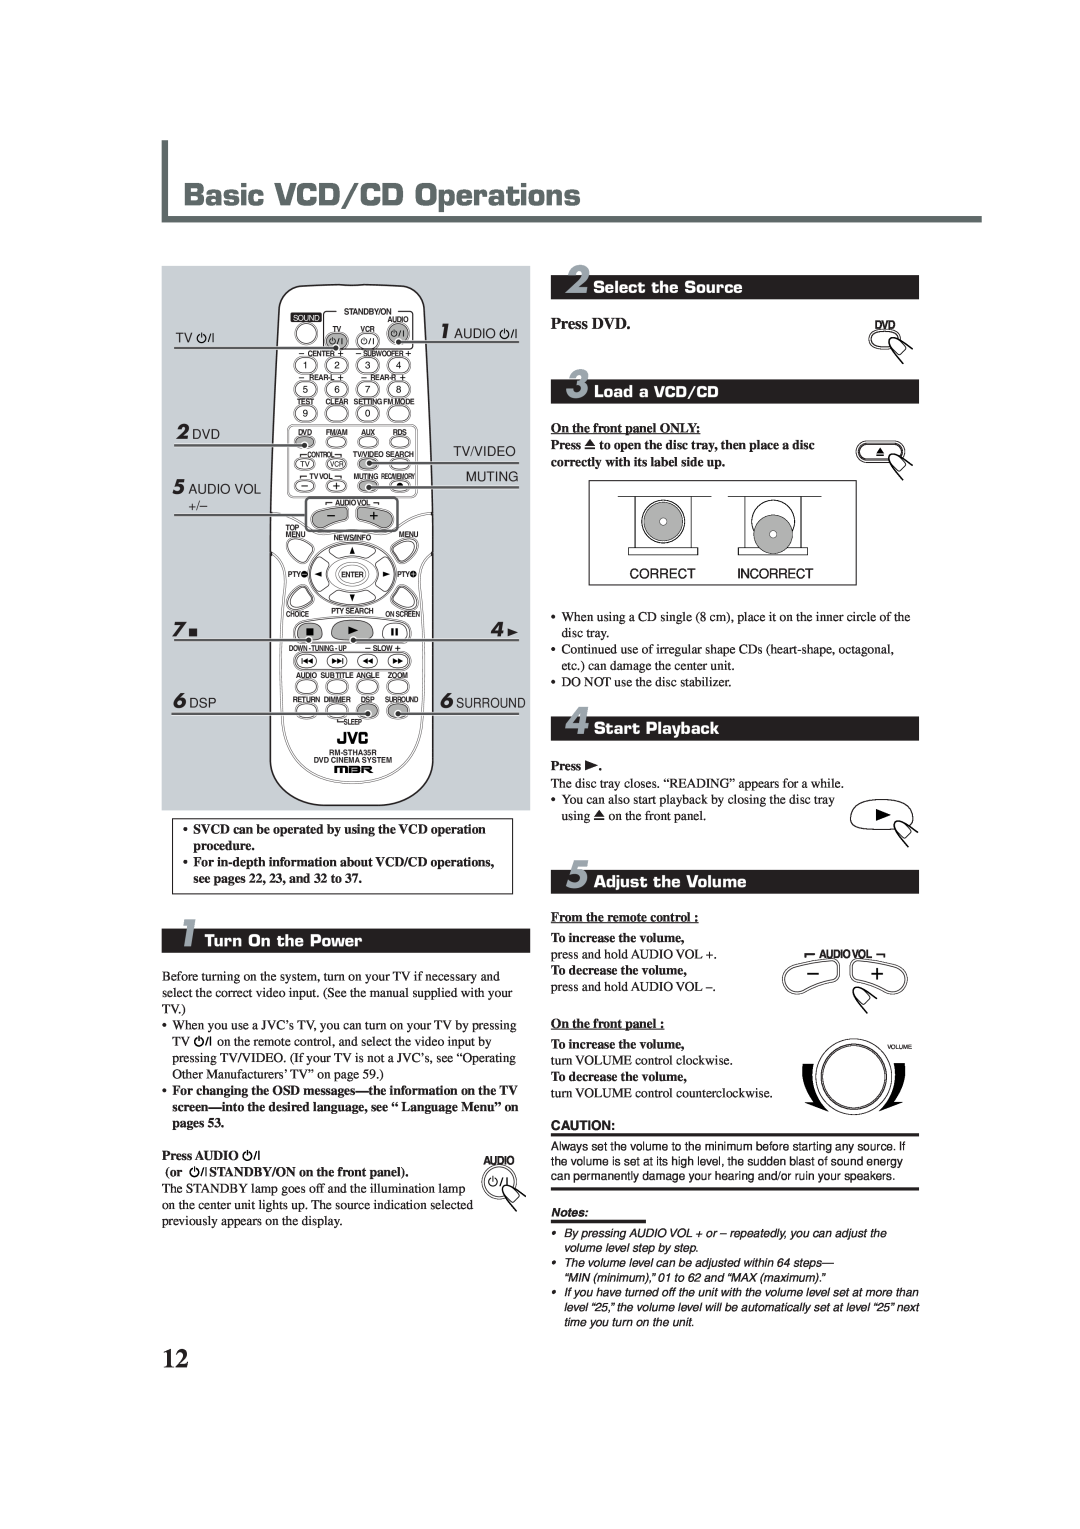 JVC TH-A35 Basic VCD/CD Operations, Load a VCD/CD, Adjust the Volume, Turn On the Power, Select the Source, Press DVD 